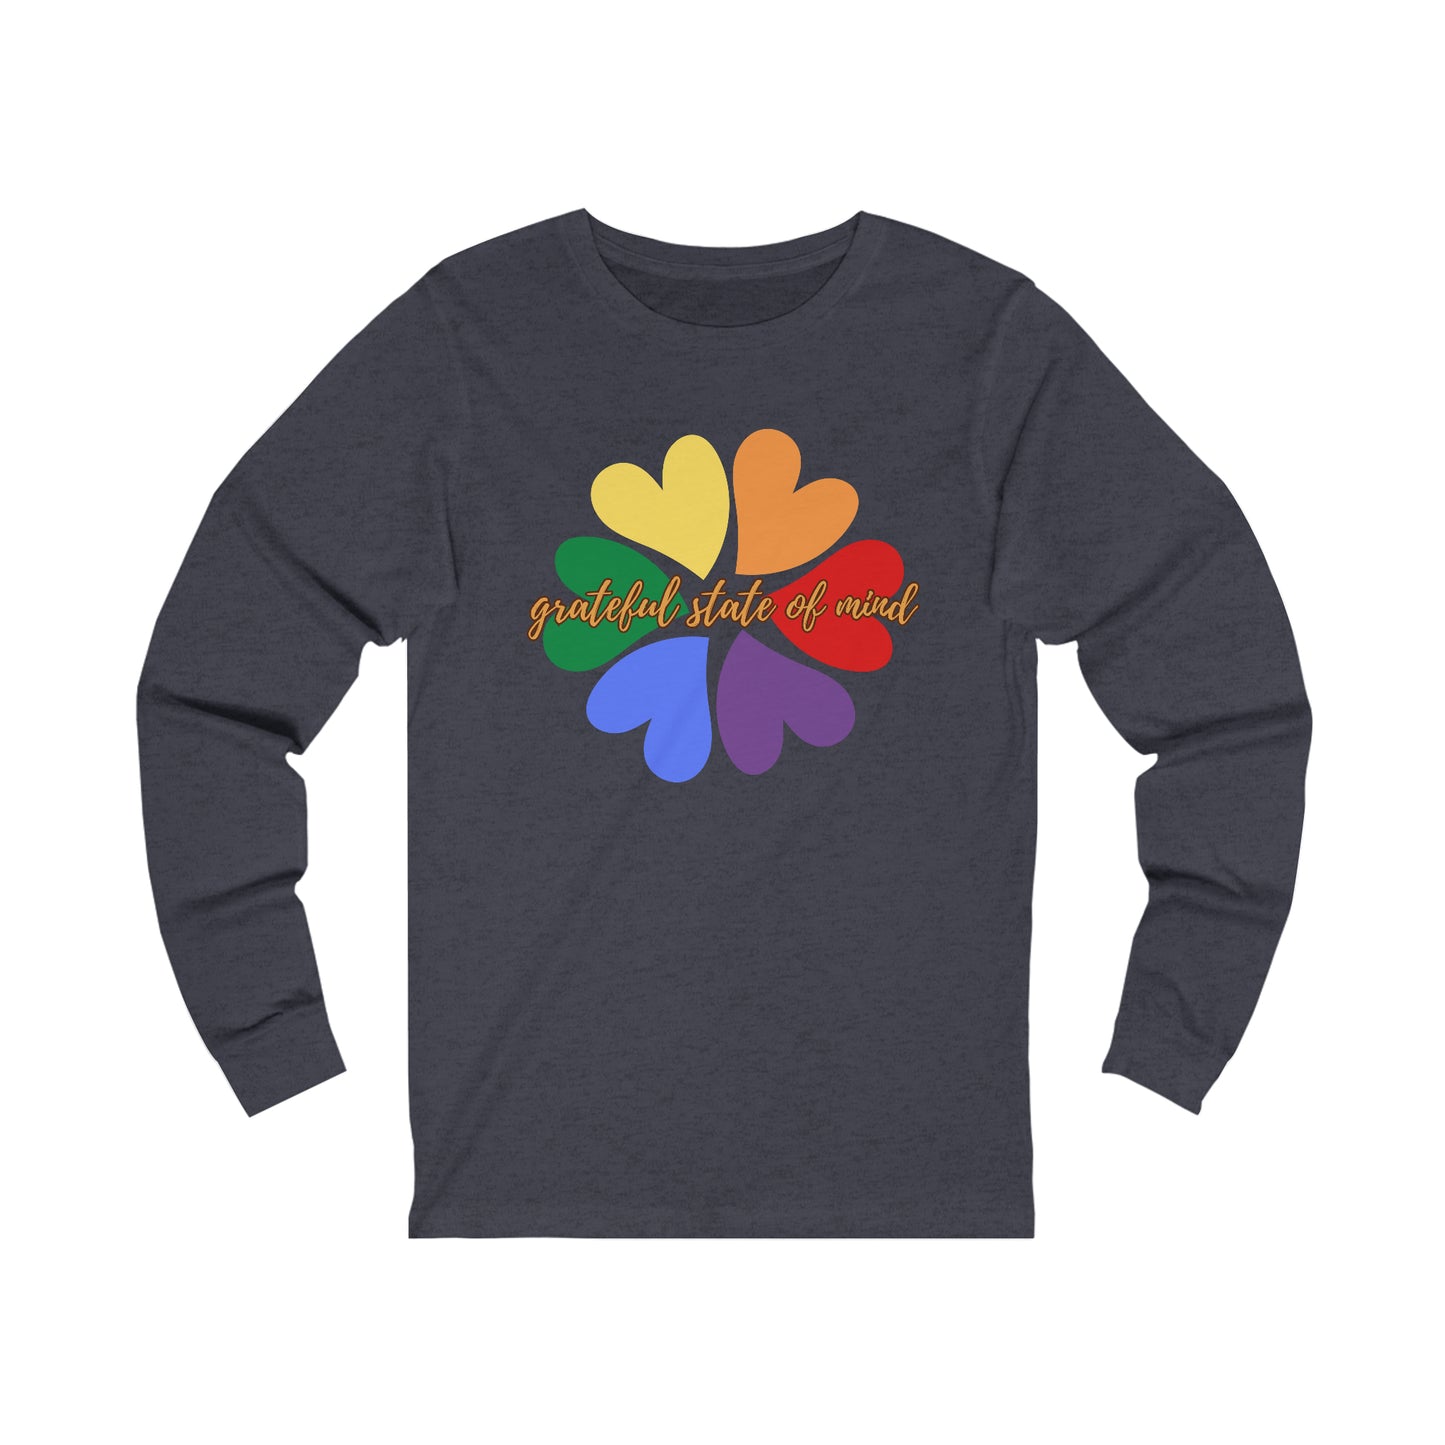 Colorful hearts under this “grateful state of mind" Unisex Jersey Long Sleeve Tee.